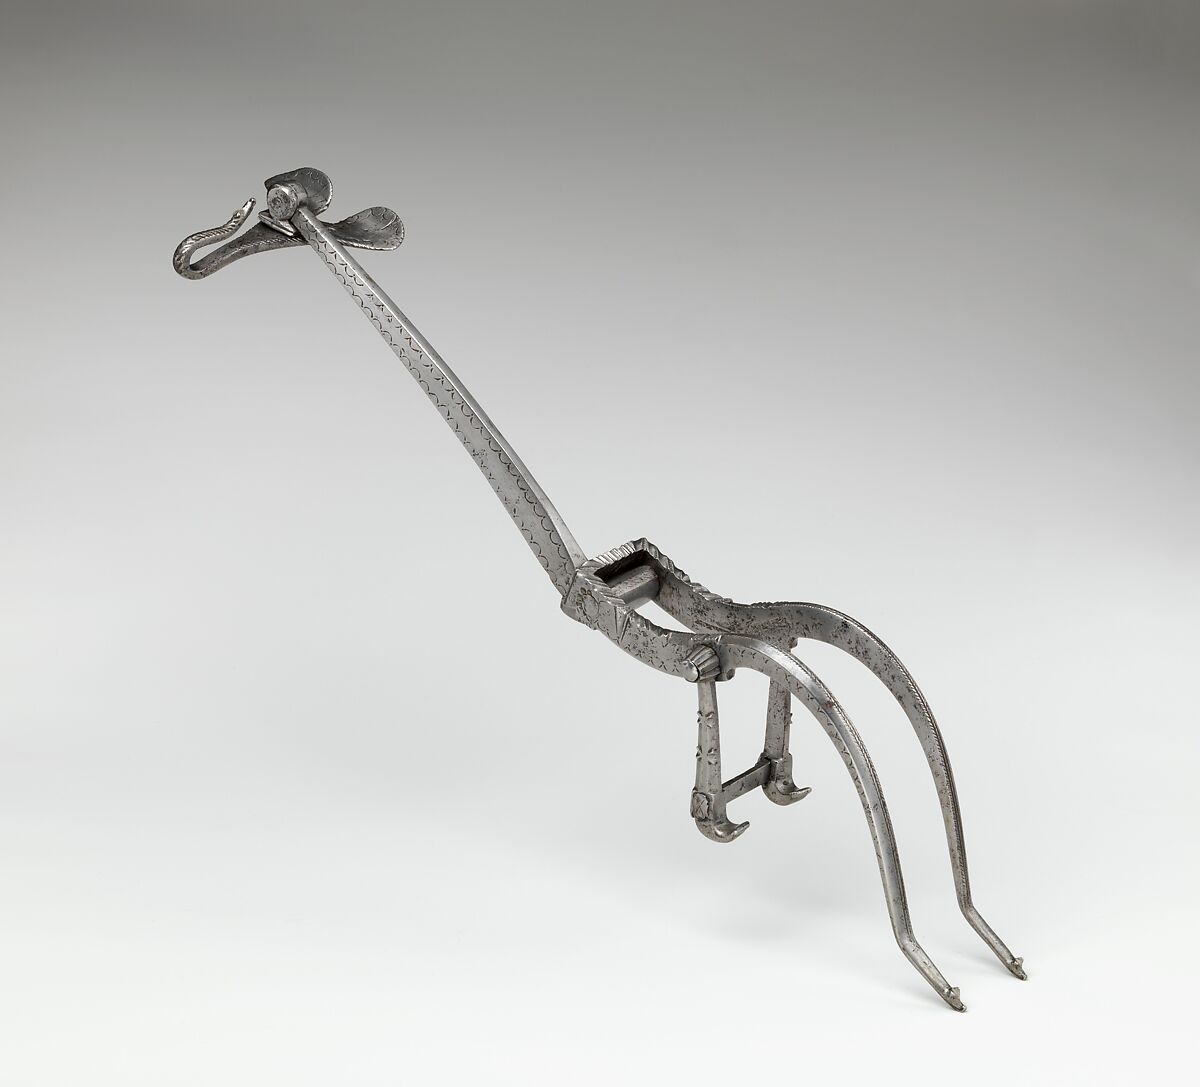 Spanning Lever (Gaffle or "Goat's-Foot" Lever), Steel, Western European, probably Spanish 